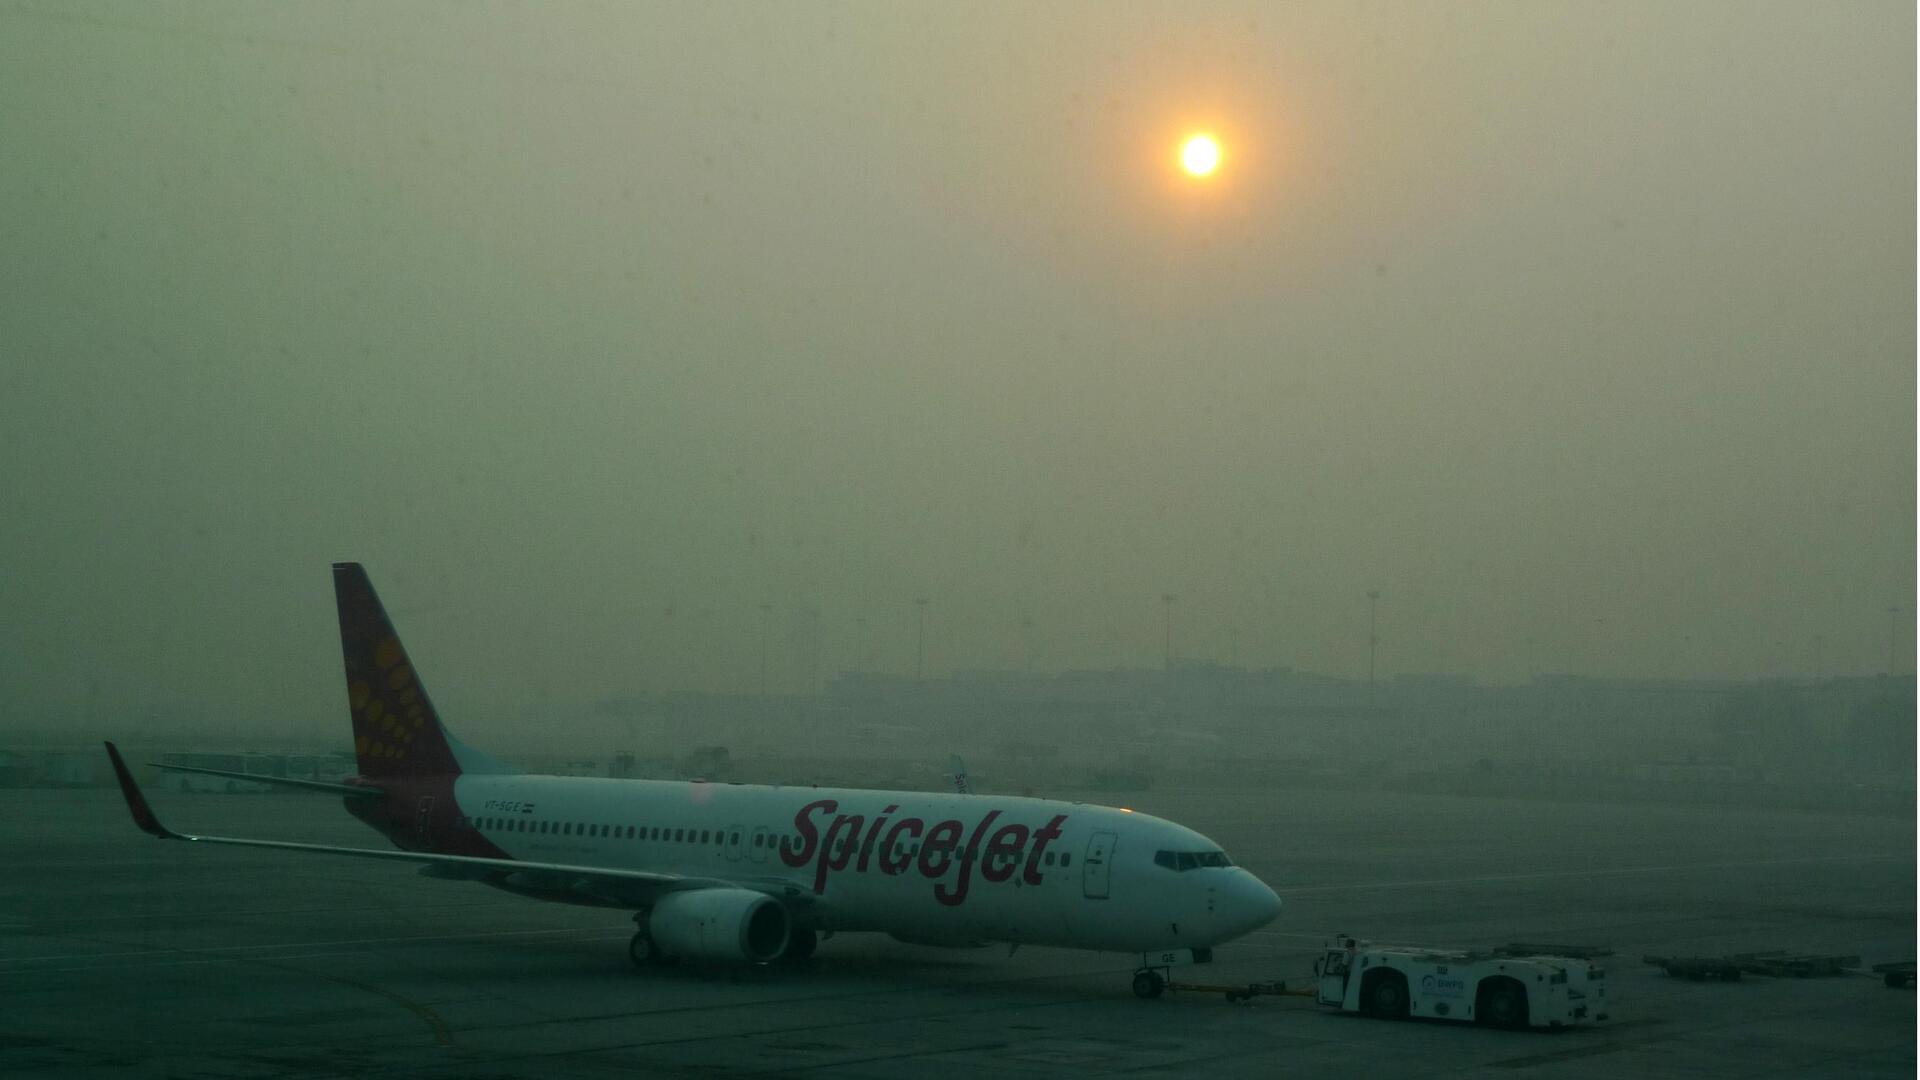 Cold wave: Delhi flight operations hit, thick fog reduces visibility